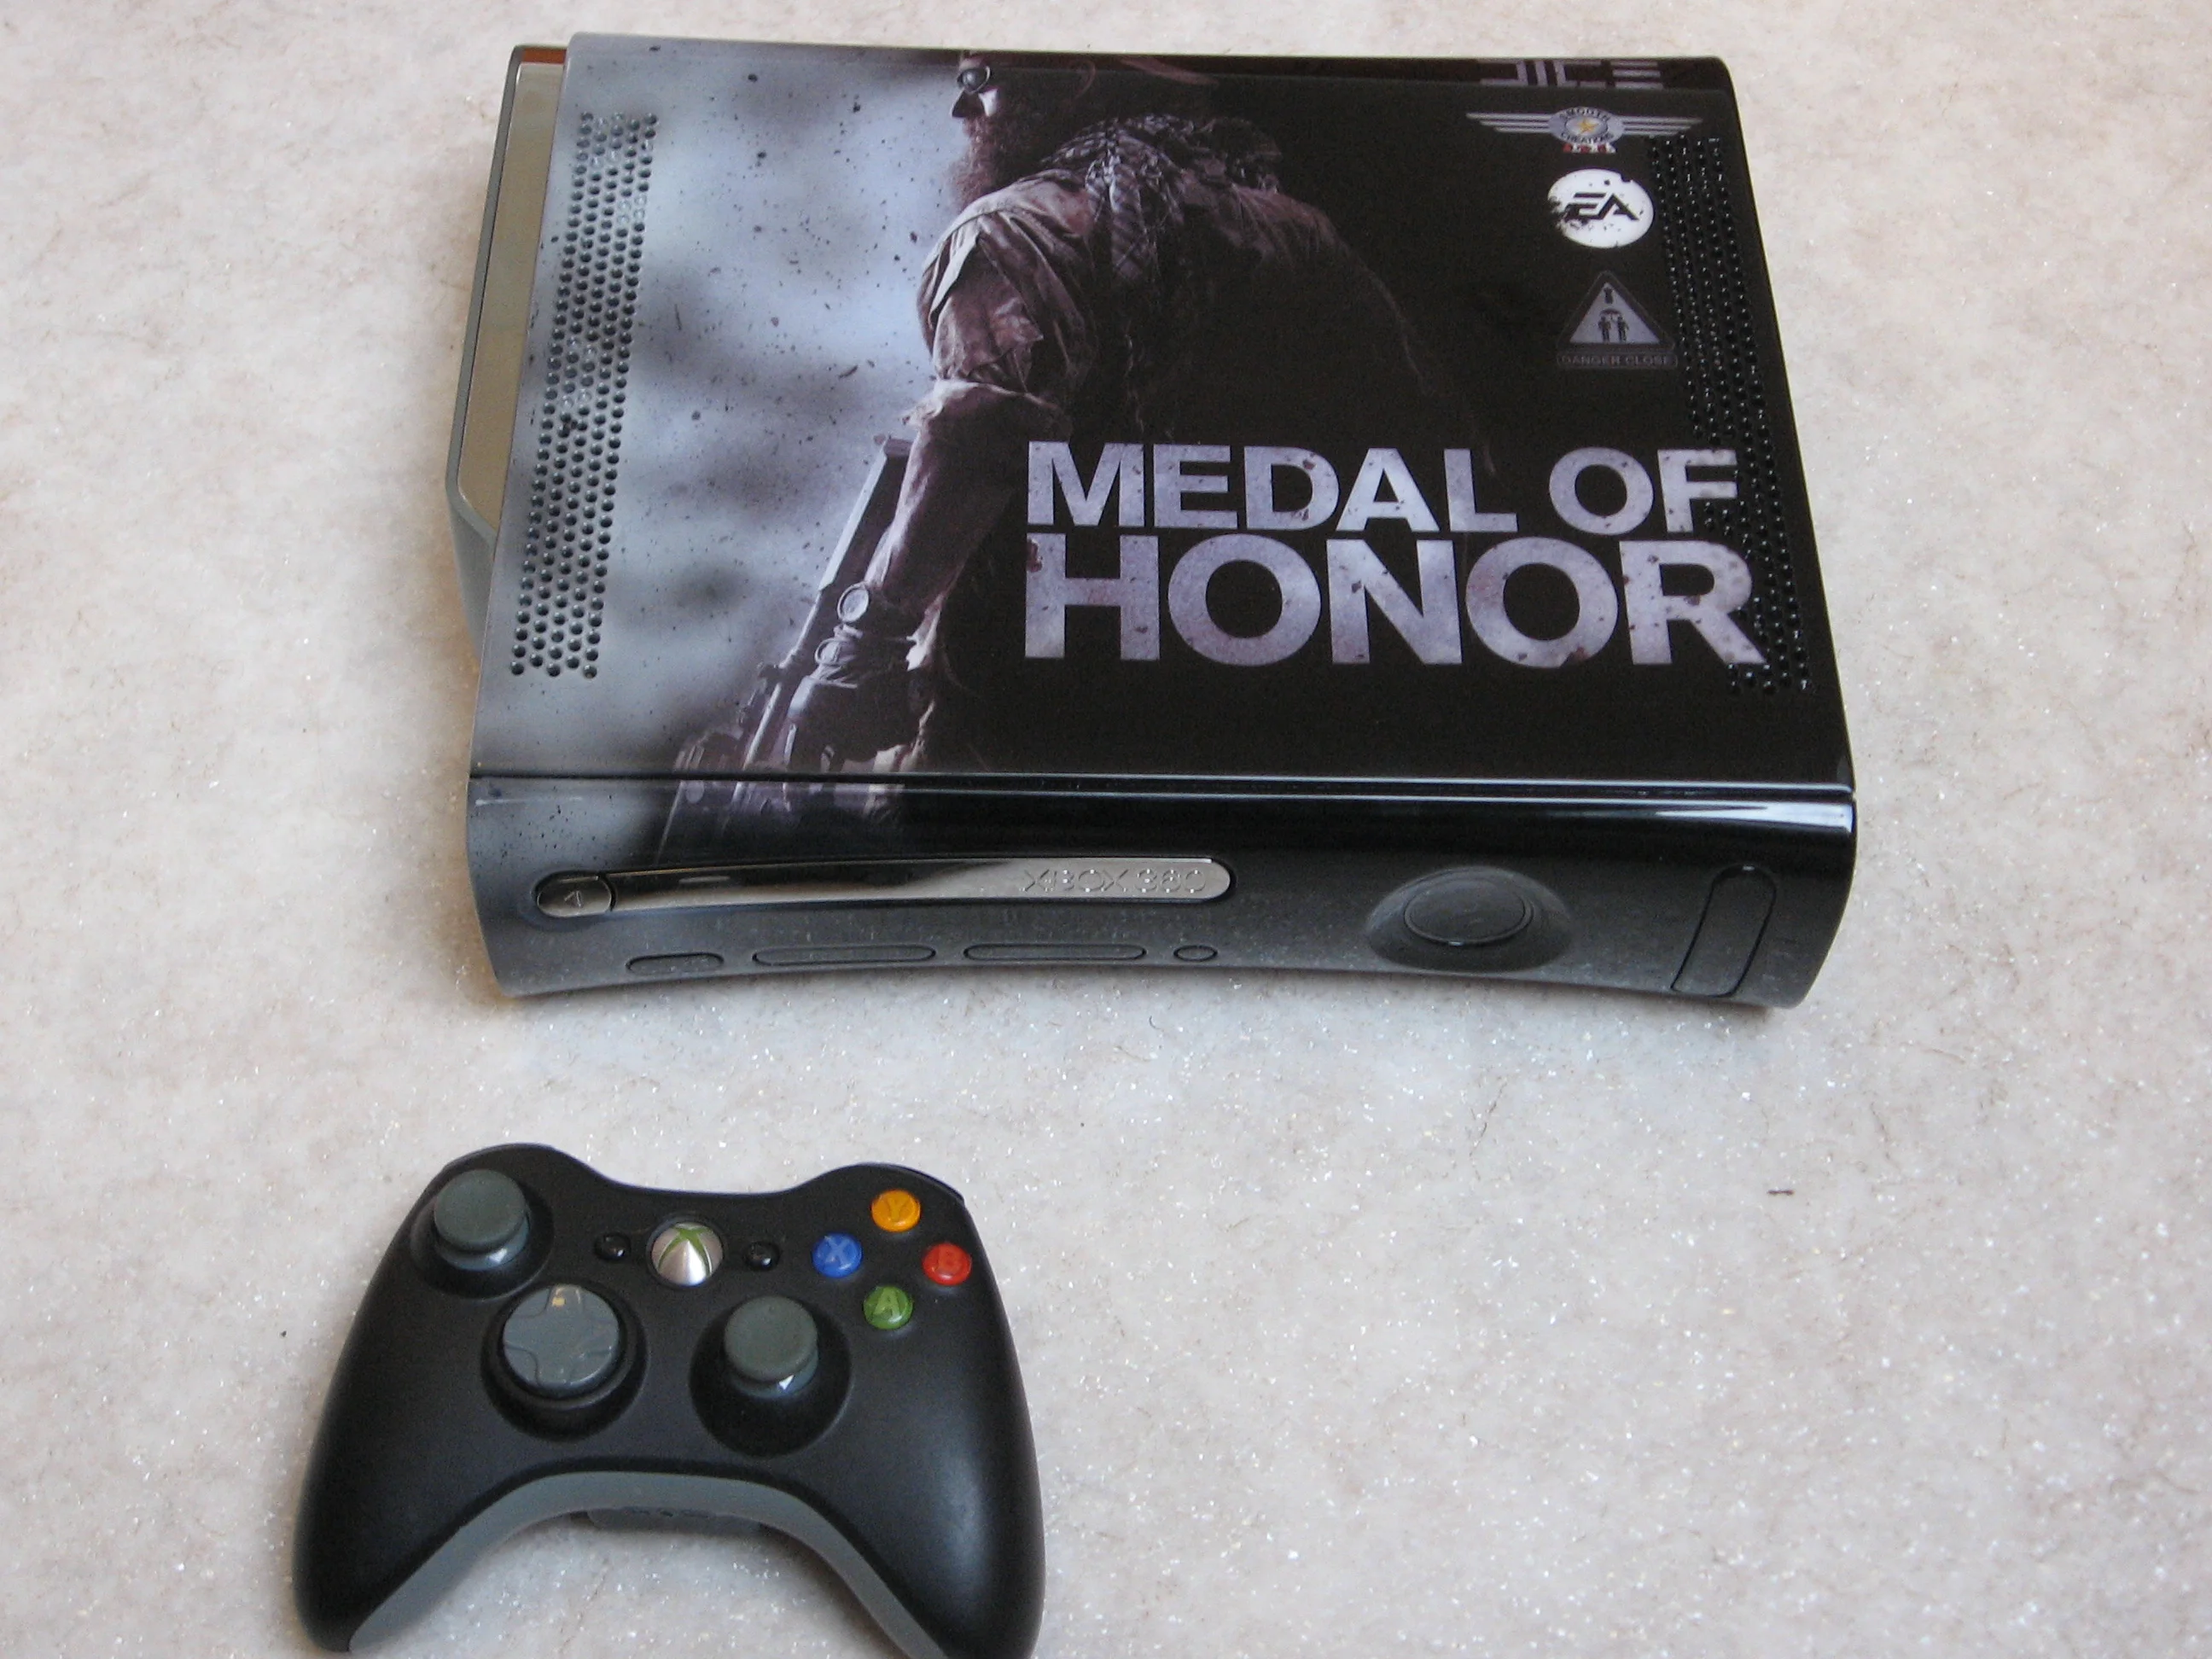 medal of honor limited edition xbox 360